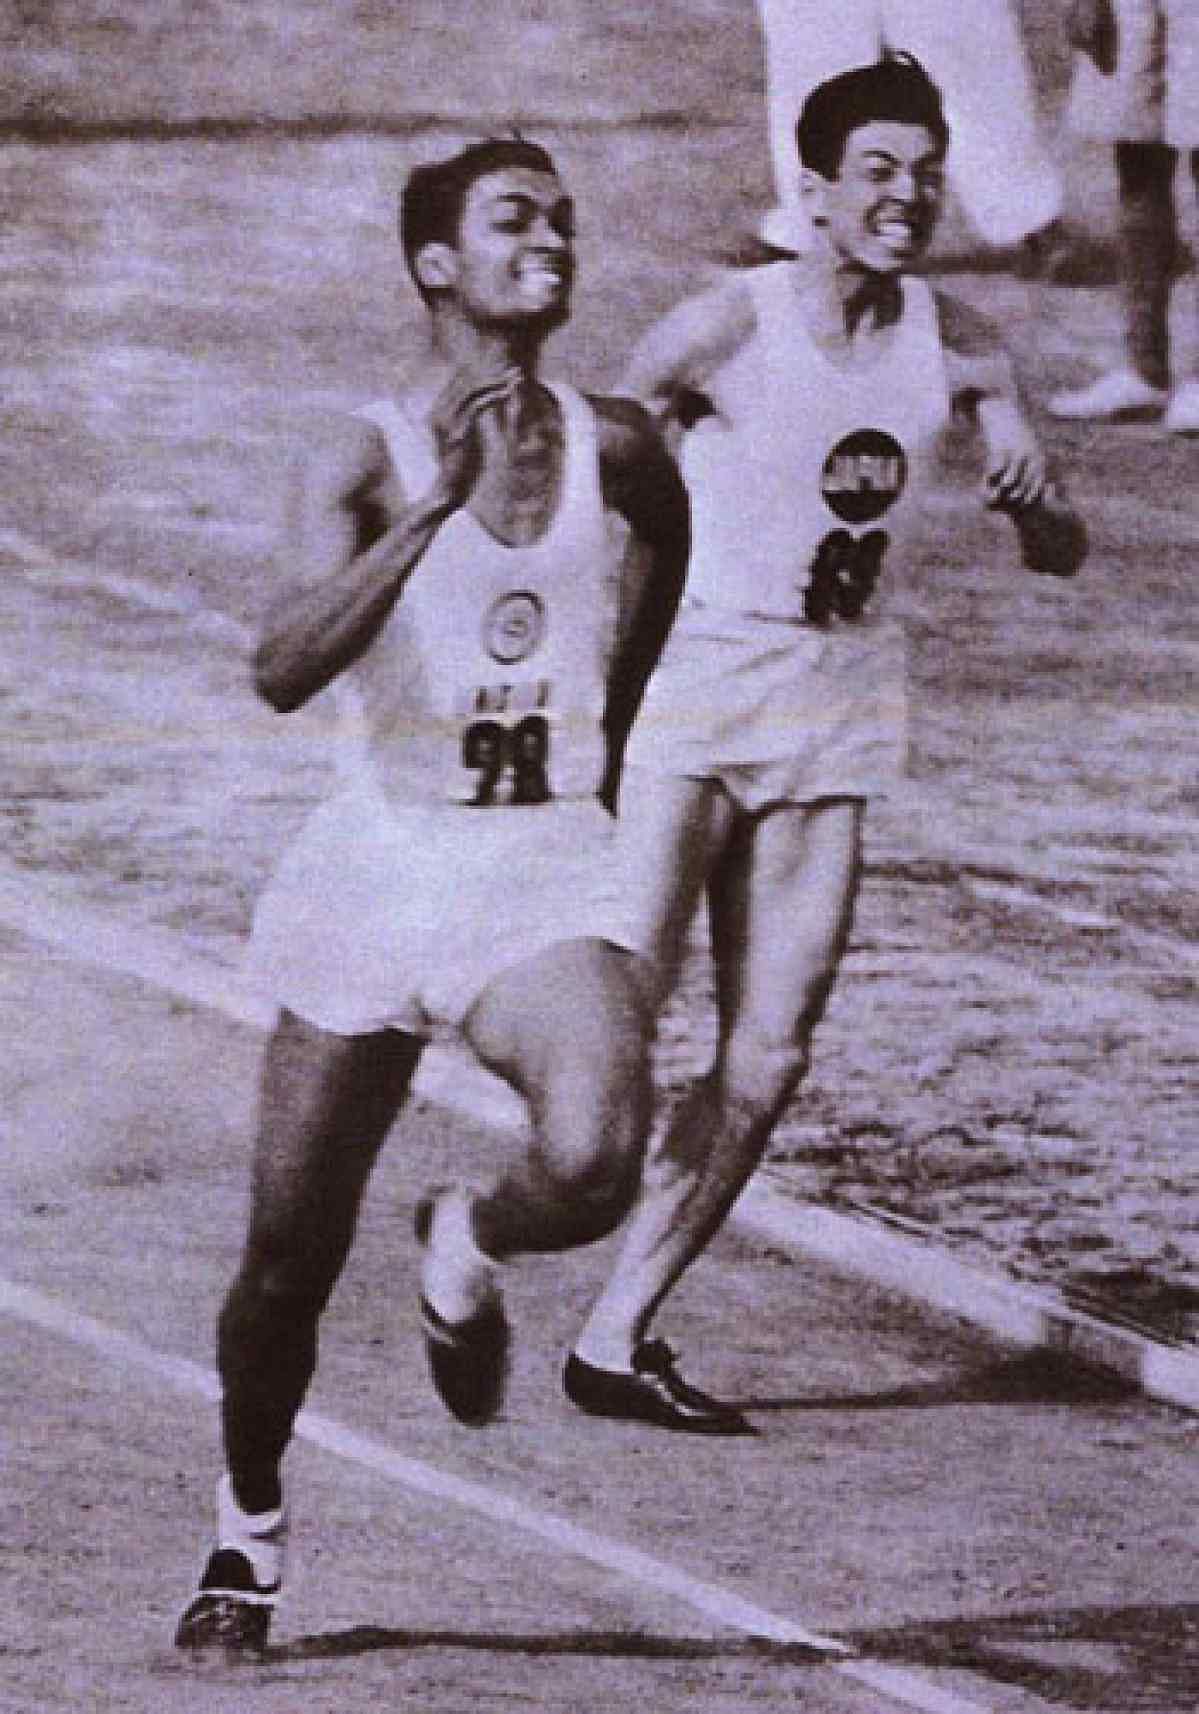 The first-ever Asian Games began in New Delhi on 4 March 1951 – more than 60 years ago.